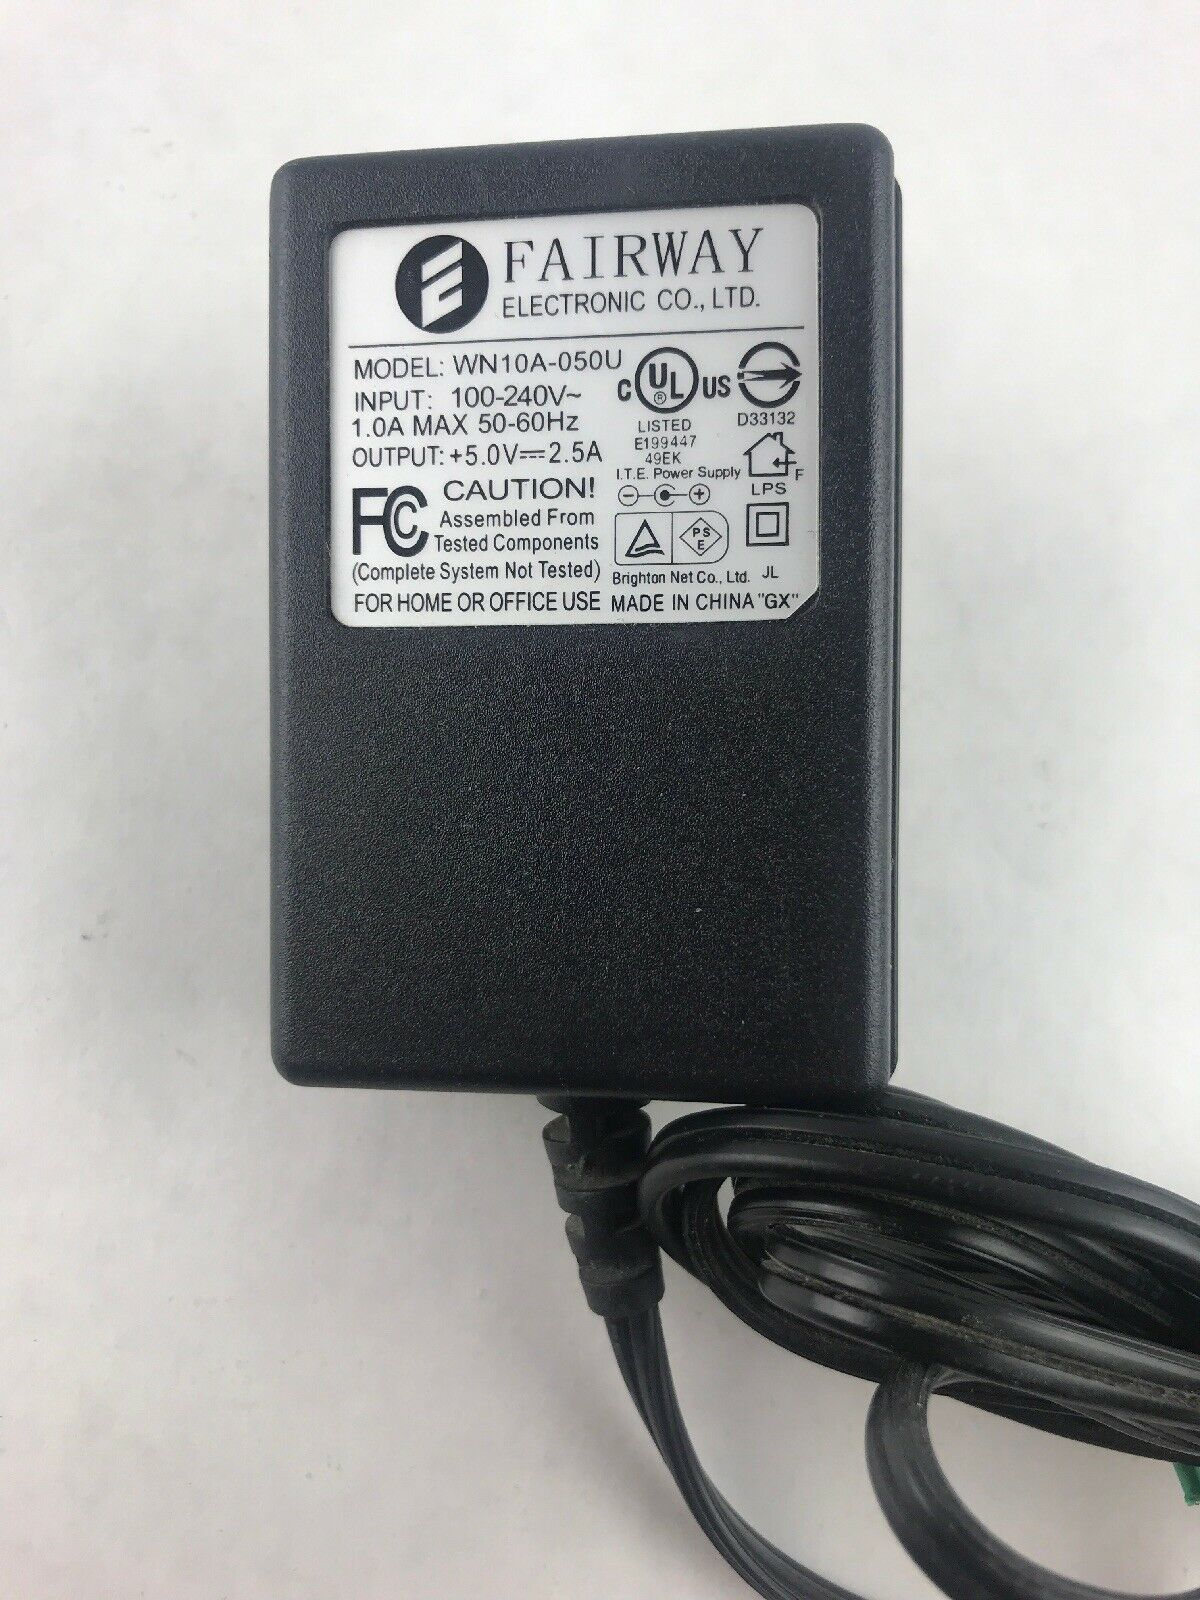 Fairway WN10A-050U AC DC Power Supply Adapter Charger Output 5V 2.5 A 5 Volts MPN: Does Not Apply Output Voltage: 5